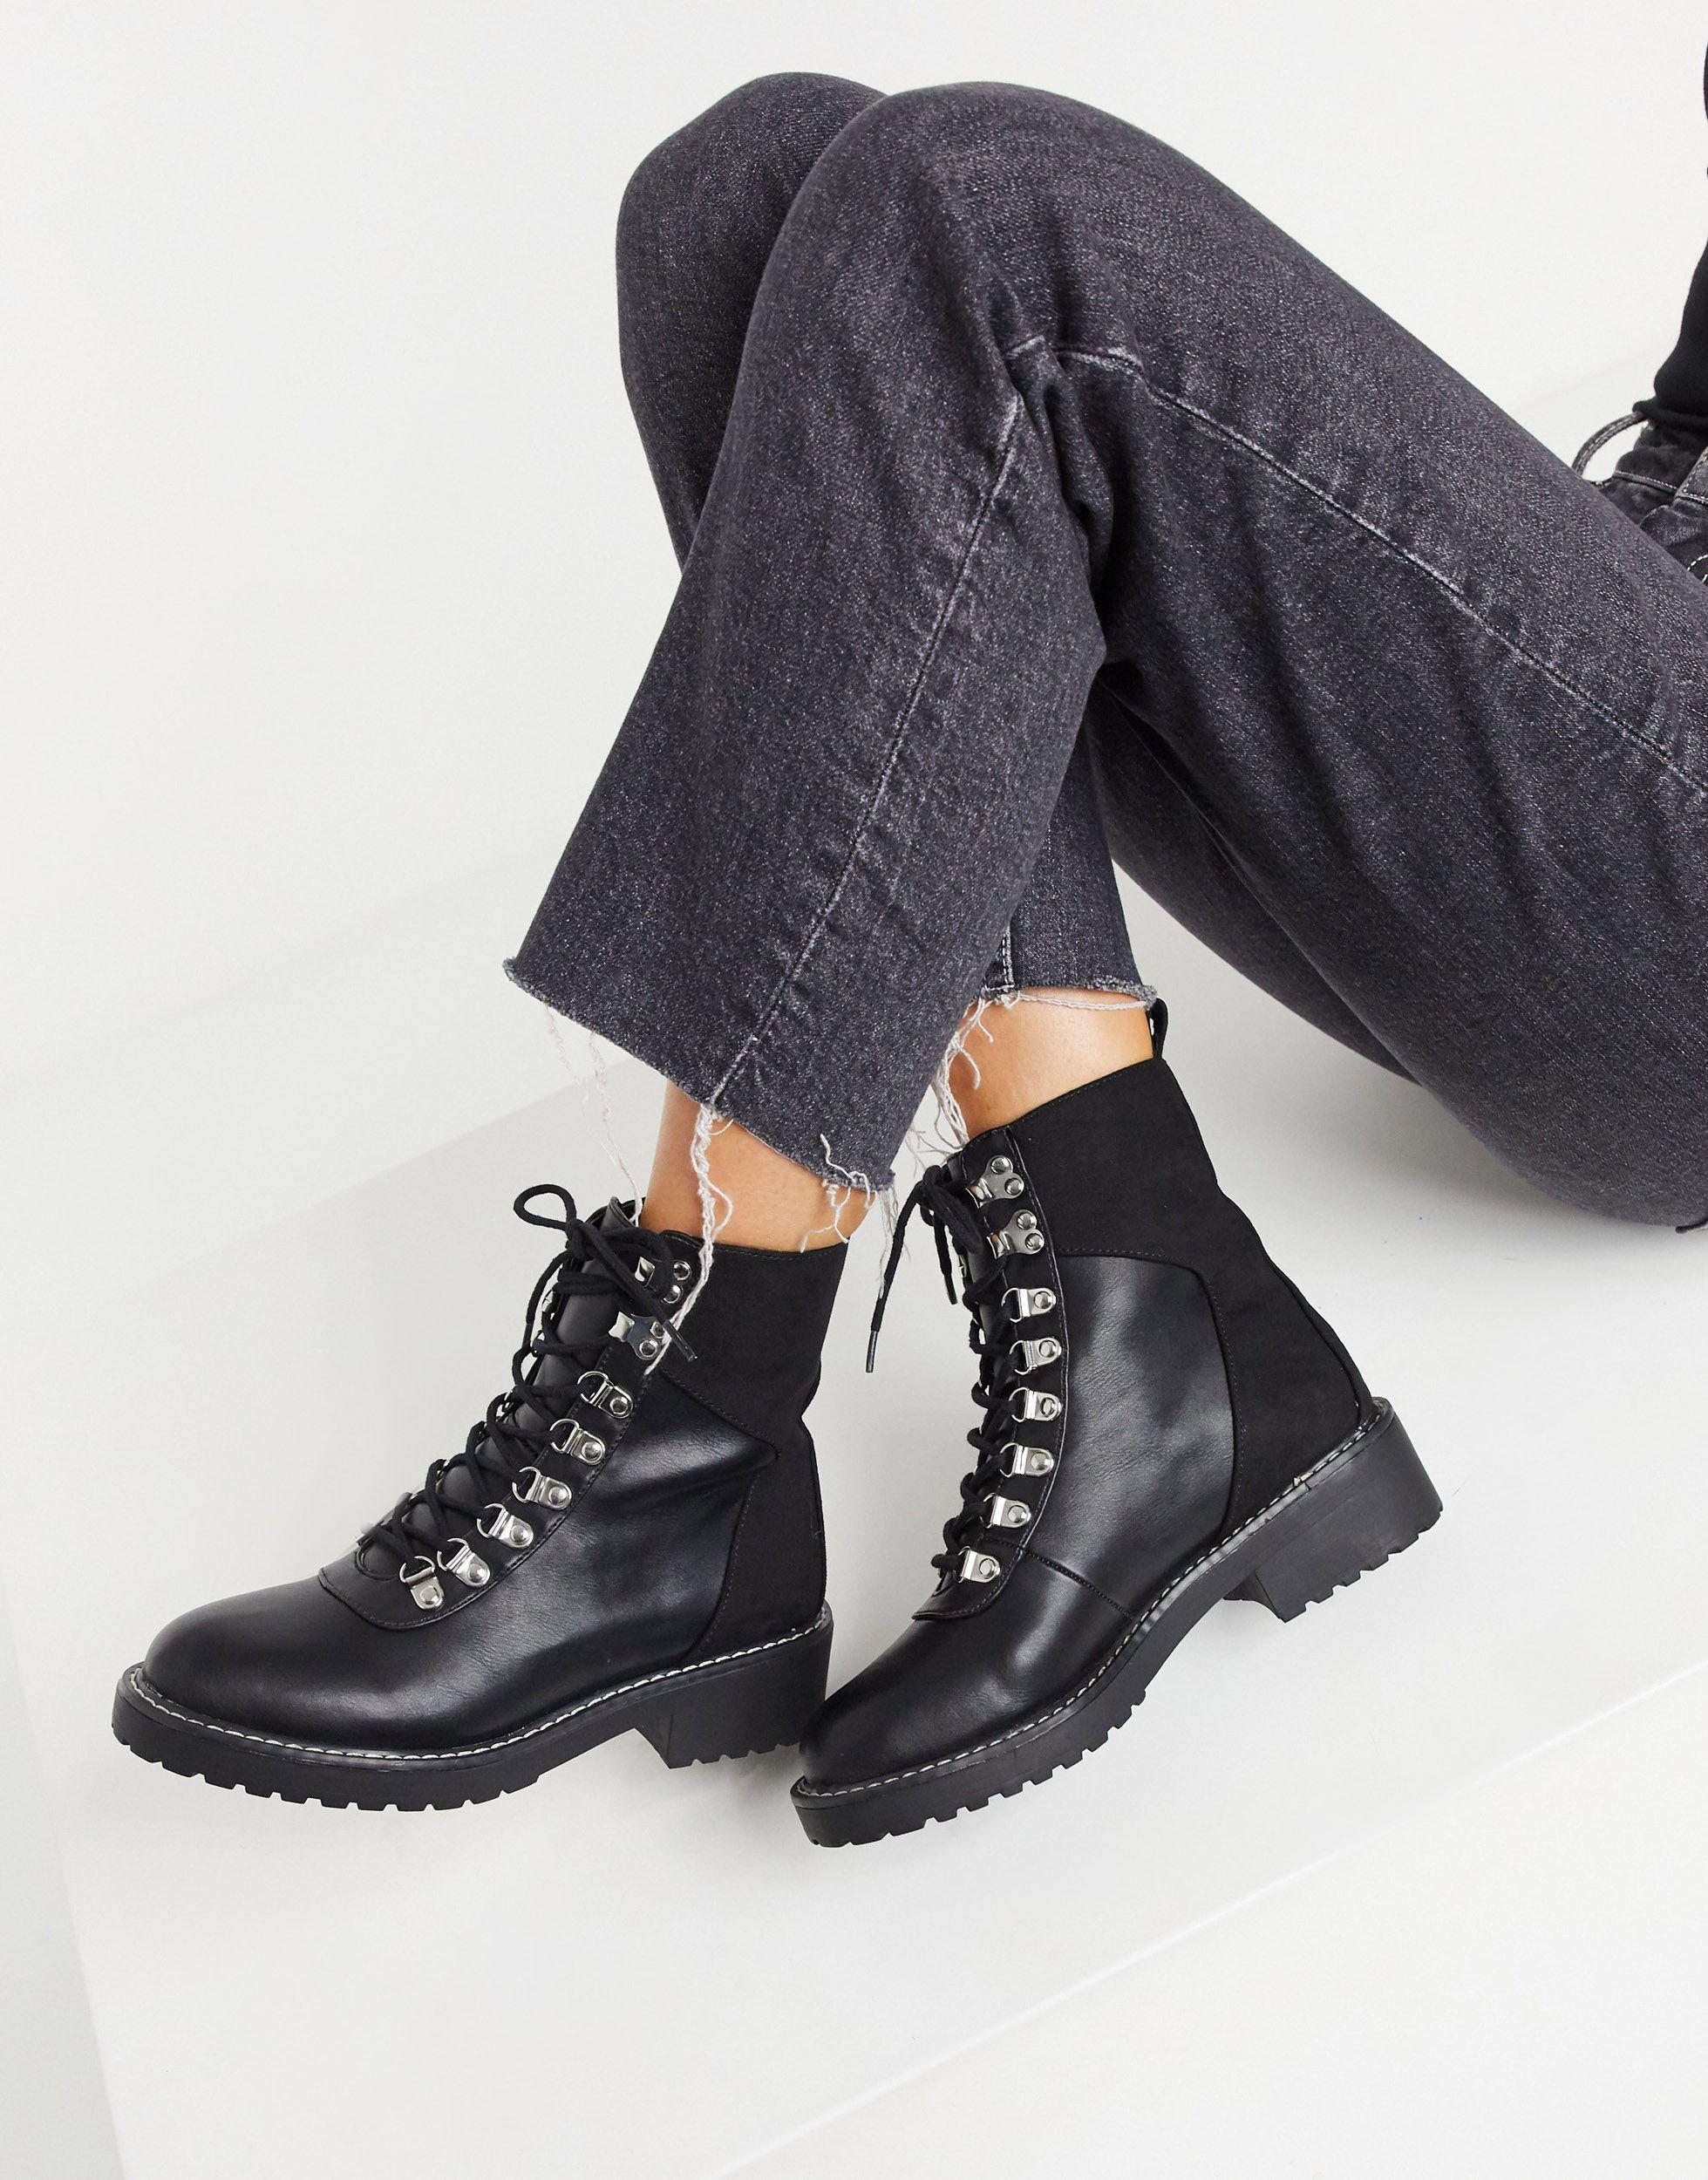 London Rebel Lace-up Boots in Black - Lyst